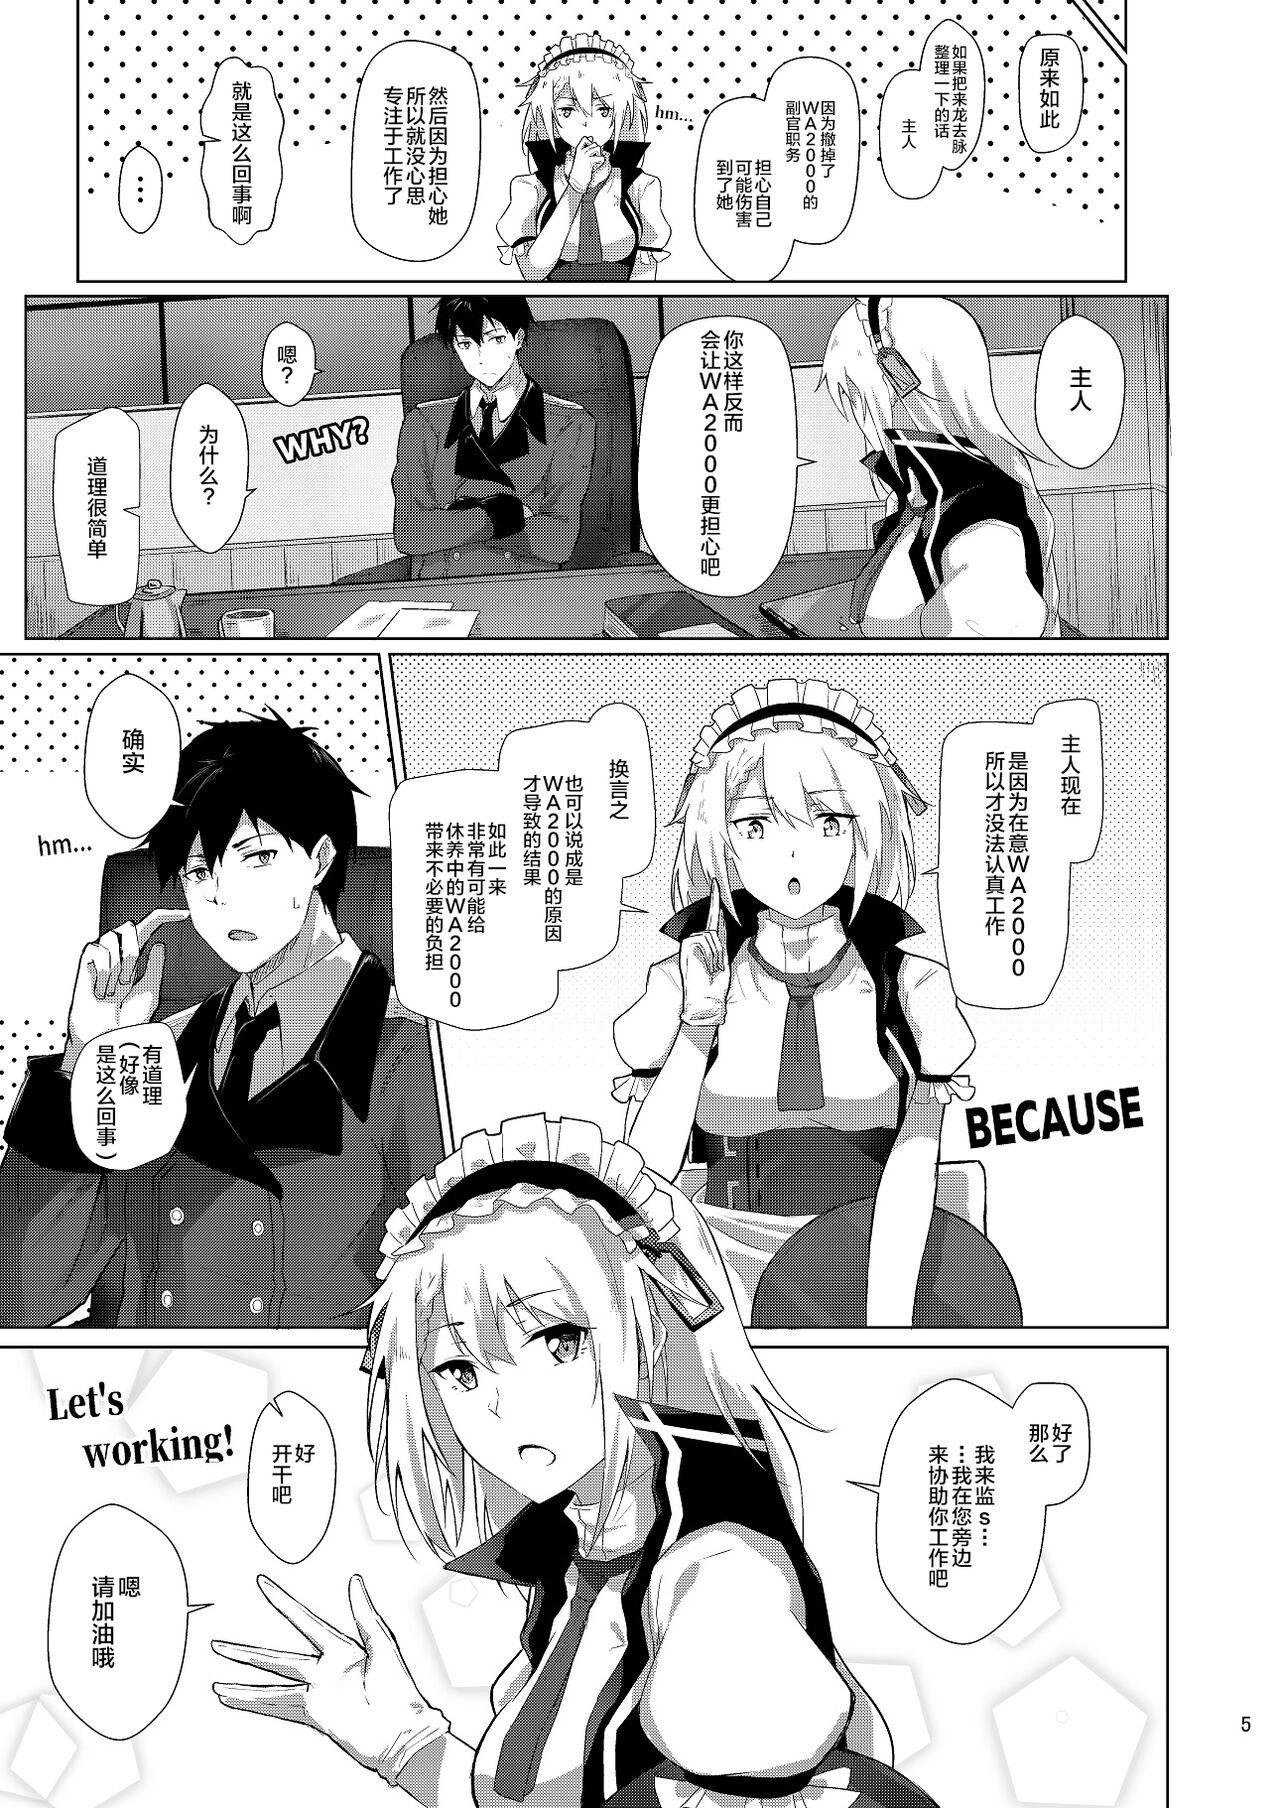 Abuse Maid no G36 - Girls frontline Women Fucking - Page 4